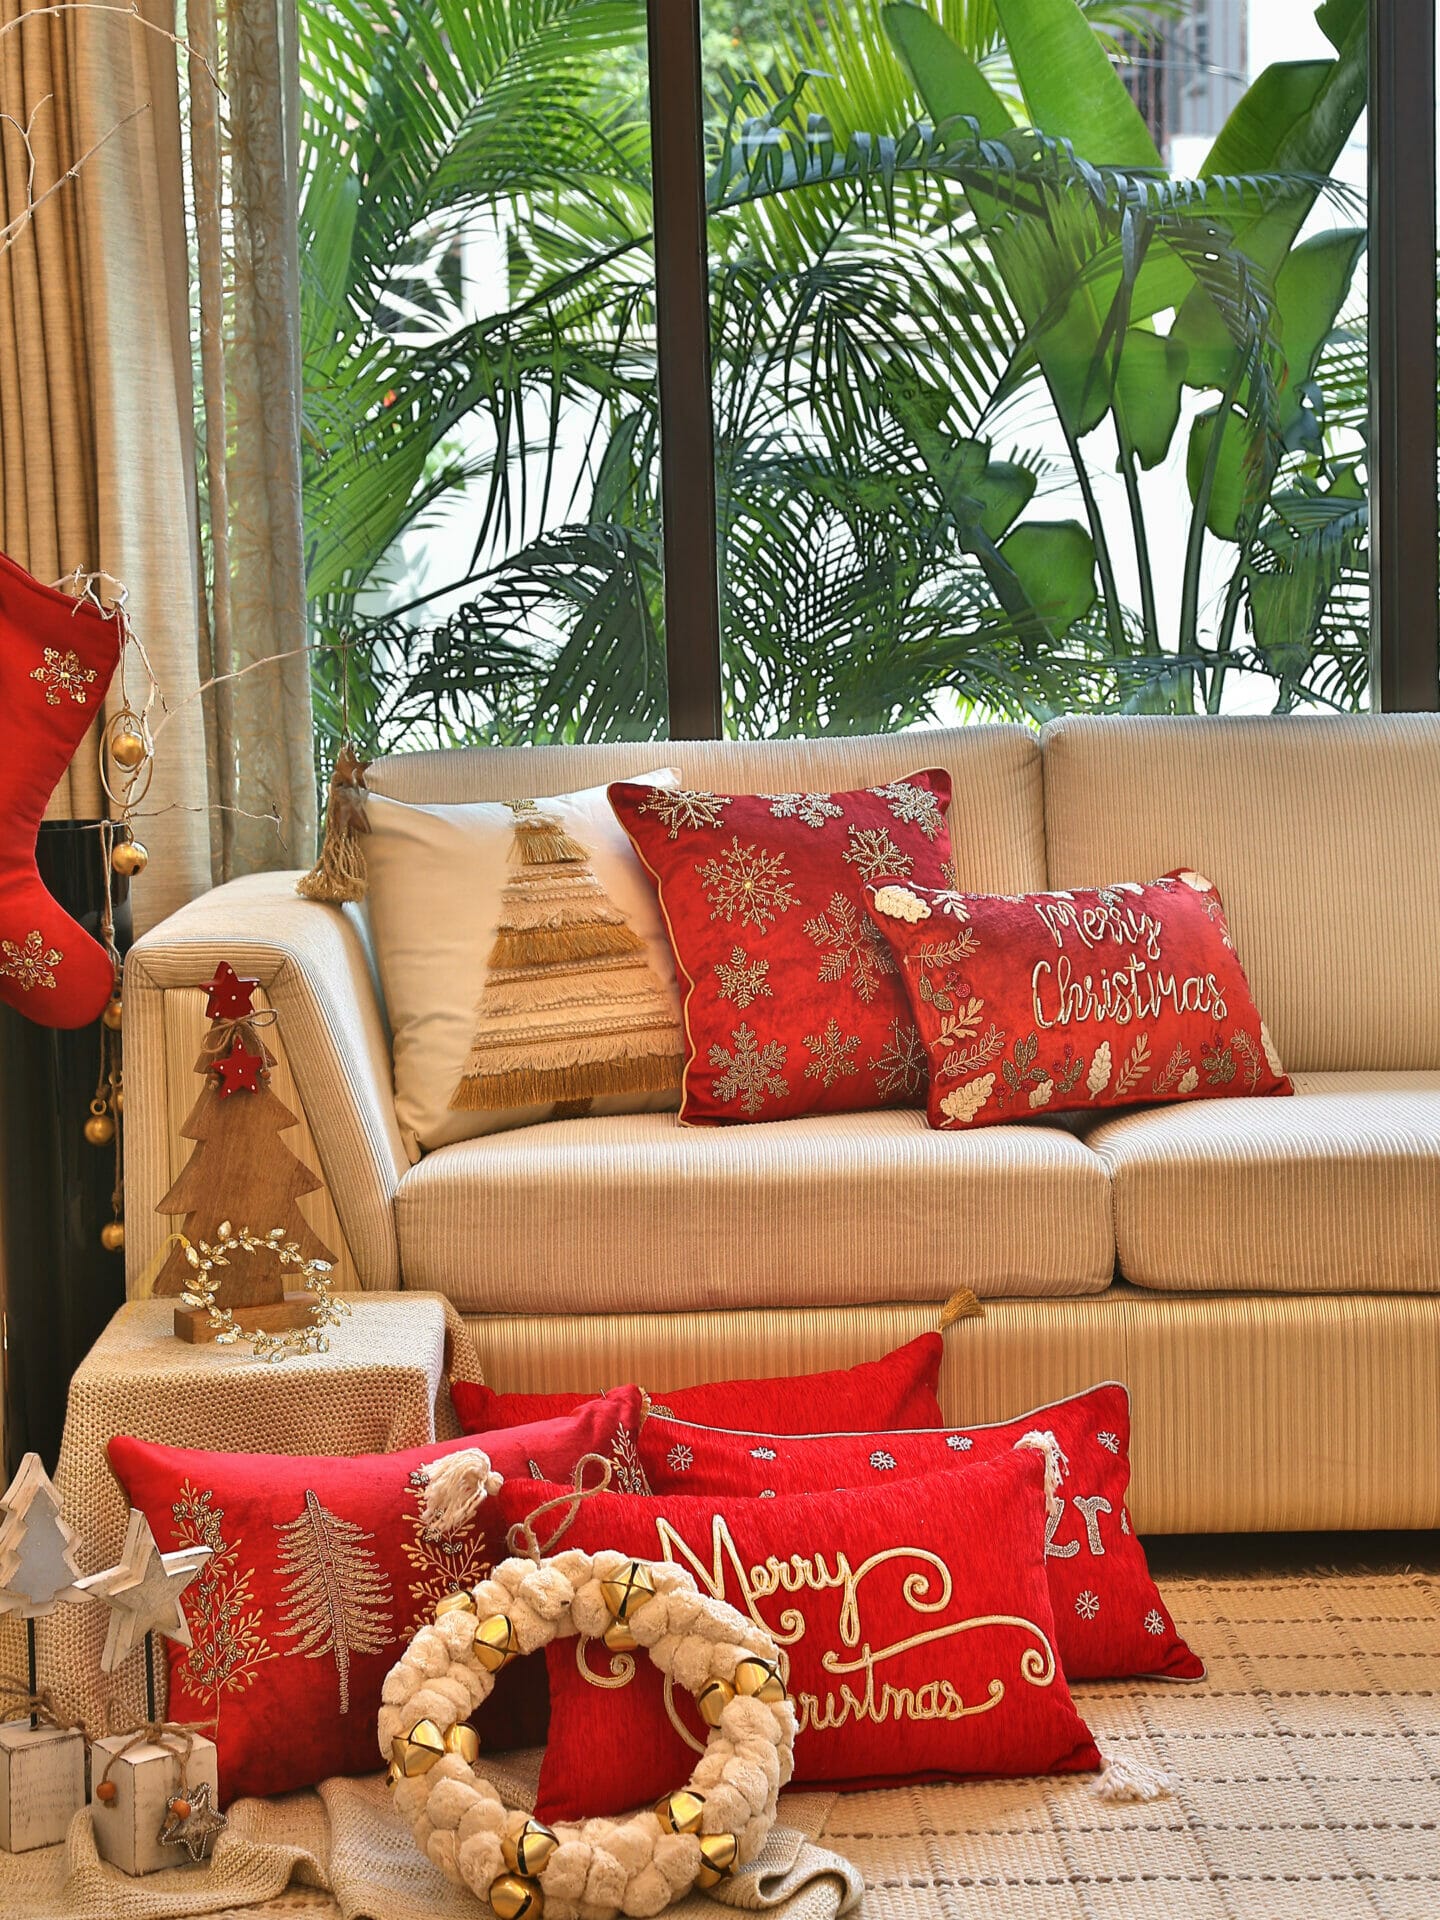 Christmas Decor Essentials By Amoli Concepts | The Decor Journal India